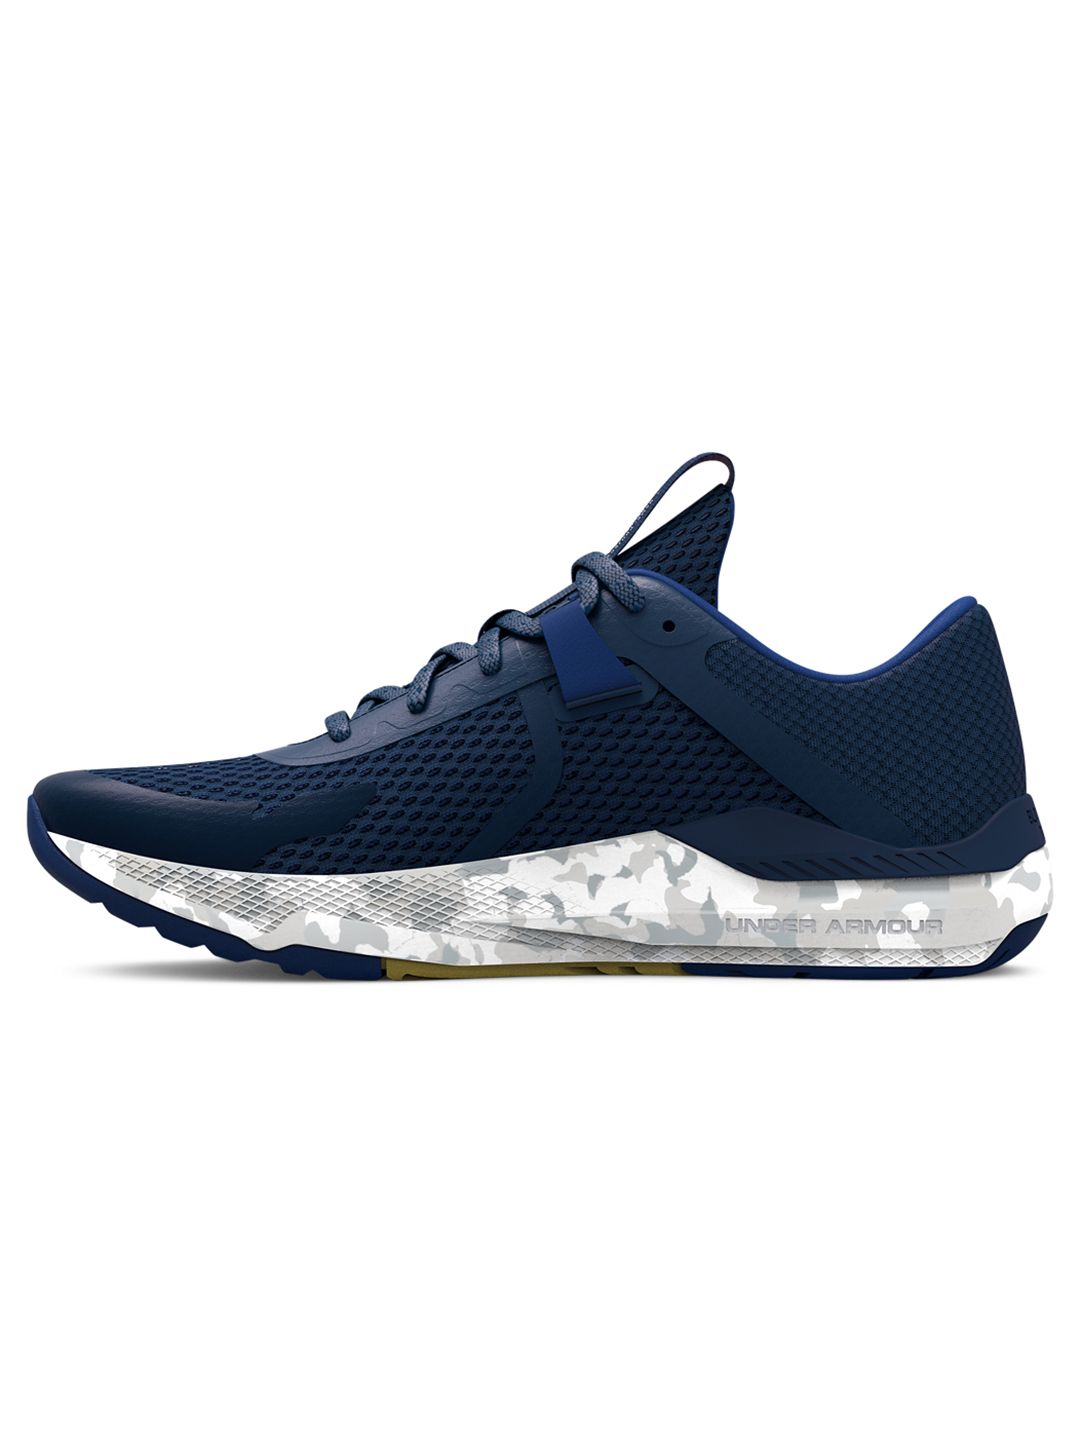 UNDER ARMOUR Unisex Navy Blue Project Rock BSR 2 Marble Training Shoes Price in India